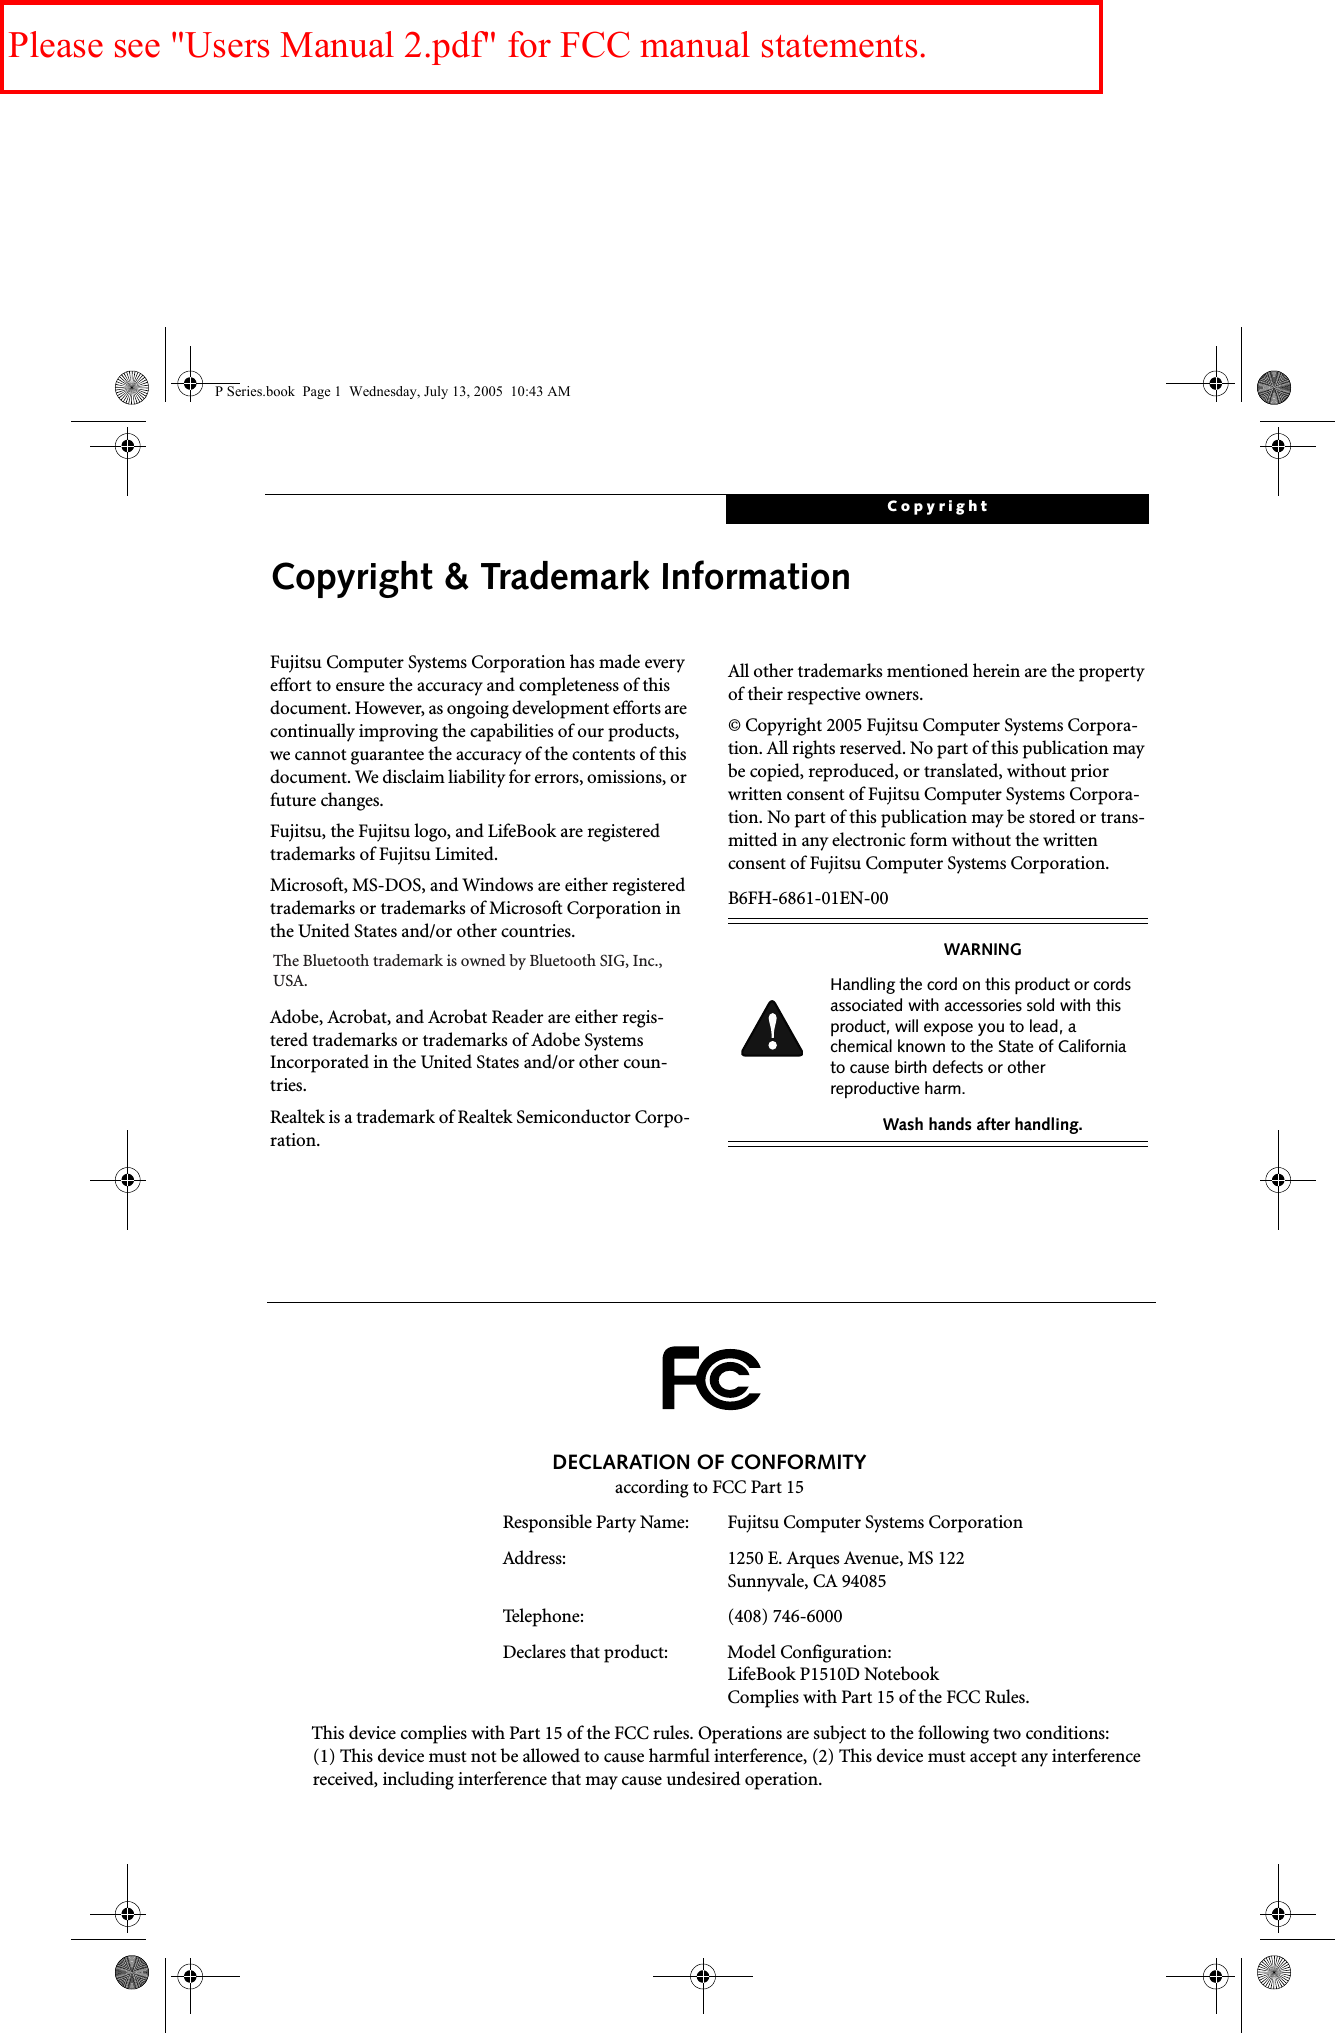 CopyrightCopyright &amp; Trademark InformationFujitsu Computer Systems Corporation has made every effort to ensure the accuracy and completeness of this document. However, as ongoing development efforts are continually improving the capabilities of our products, we cannot guarantee the accuracy of the contents of this document. We disclaim liability for errors, omissions, or future changes.Fujitsu, the Fujitsu logo, and LifeBook are registered trademarks of Fujitsu Limited.Microsoft, MS-DOS, and Windows are either registered trademarks or trademarks of Microsoft Corporation in the United States and/or other countries.Adobe, Acrobat, and Acrobat Reader are either regis-tered trademarks or trademarks of Adobe Systems Incorporated in the United States and/or other coun-tries.Realtek is a trademark of Realtek Semiconductor Corpo-ration.  All other trademarks mentioned herein are the property of their respective owners.© Copyright 2005 Fujitsu Computer Systems Corpora-tion. All rights reserved. No part of this publication may be copied, reproduced, or translated, without prior written consent of Fujitsu Computer Systems Corpora-tion. No part of this publication may be stored or trans-mitted in any electronic form without the written consent of Fujitsu Computer Systems Corporation.B6FH-6861-01EN-00WARNINGHandling the cord on this product or cords associated with accessories sold with this product, will expose you to lead, a chemical known to the State of California to cause birth defects or other reproductive harm. Wash hands after handling.DECLARATION OF CONFORMITYaccording to FCC Part 15Responsible Party Name: Fujitsu Computer Systems CorporationAddress:  1250 E. Arques Avenue, MS 122Sunnyvale, CA 94085Telephone: (408) 746-6000Declares that product: Model Configuration:LifeBook P1510D Notebook Complies with Part 15 of the FCC Rules.This device complies with Part 15 of the FCC rules. Operations are subject to the following two conditions:(1) This device must not be allowed to cause harmful interference, (2) This device must accept any interference received, including interference that may cause undesired operation.P Series.book  Page 1  Wednesday, July 13, 2005  10:43 AMThe Bluetooth trademark is owned by Bluetooth SIG, Inc.,USA.Please see &quot;Users Manual 2.pdf&quot; for FCC manual statements.